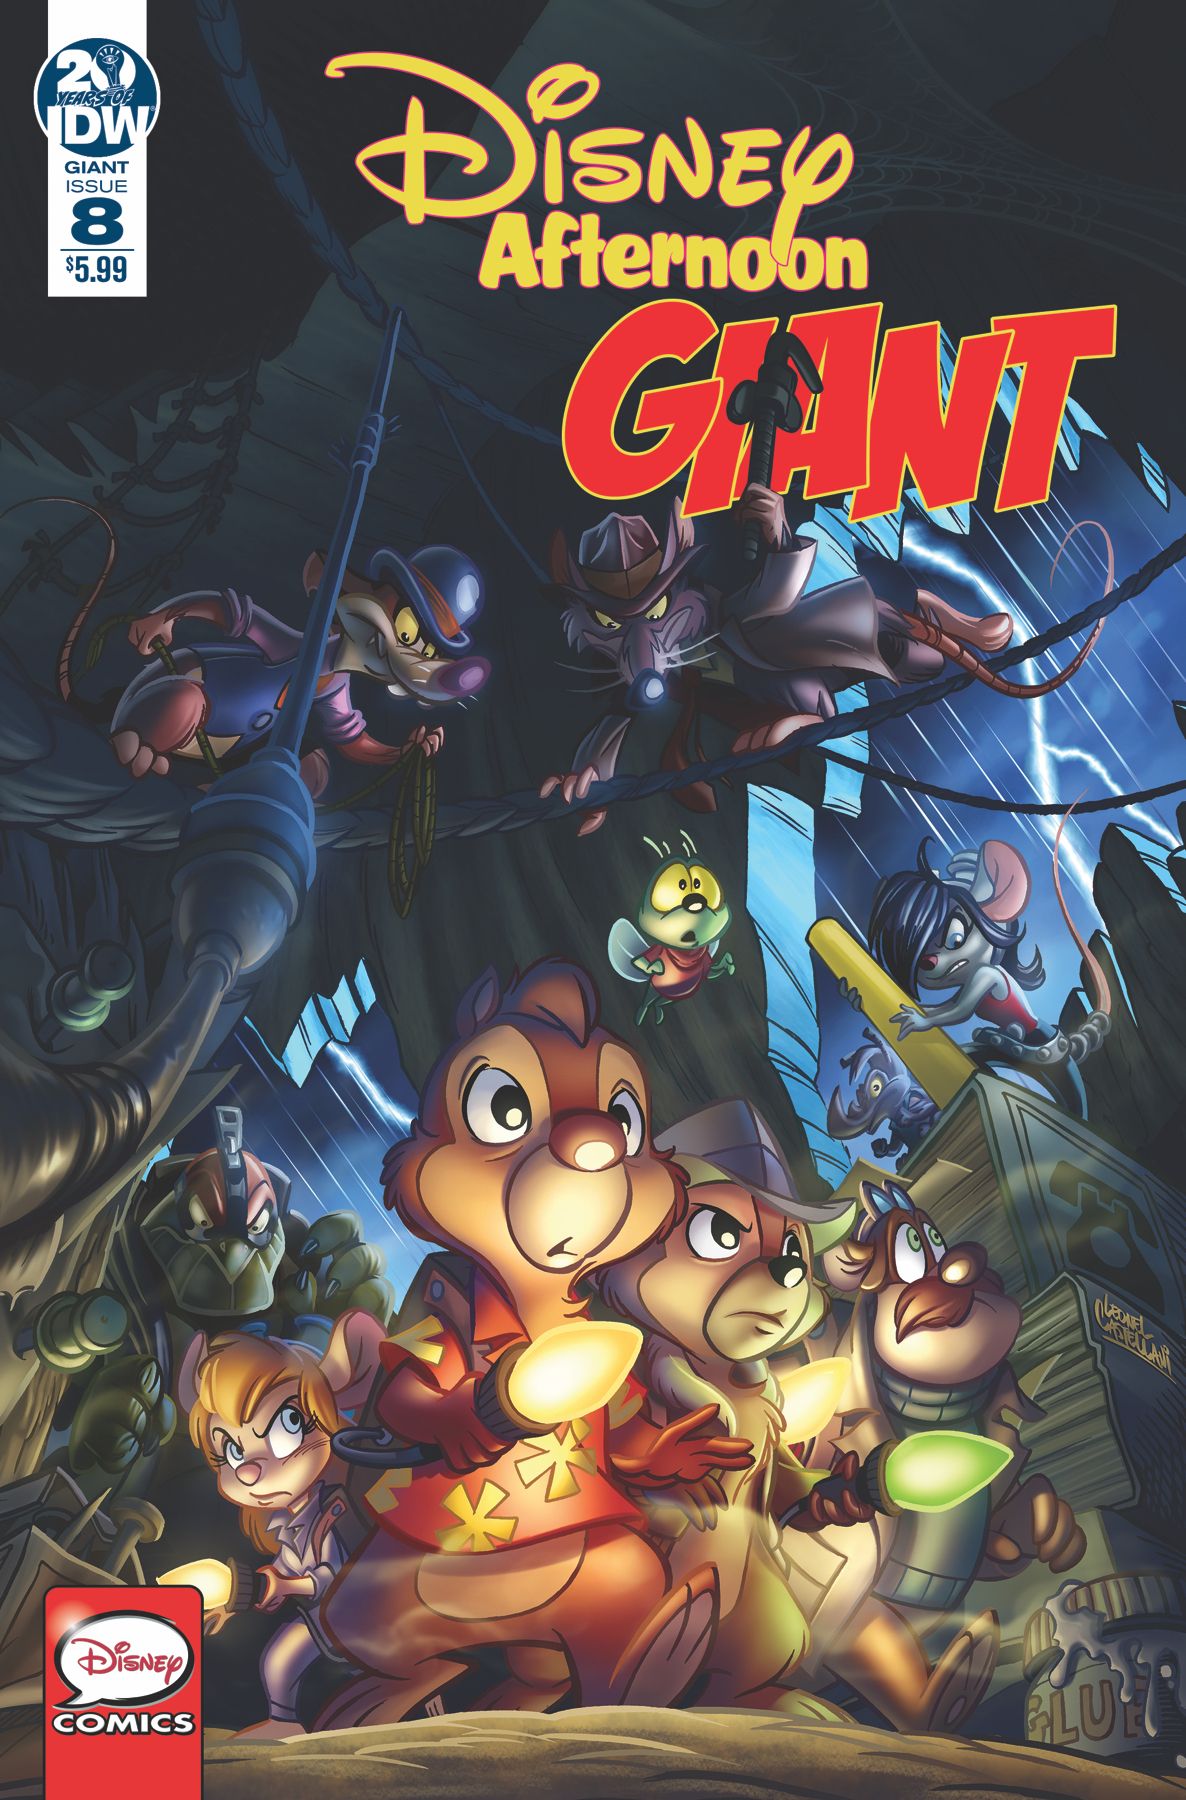 Disney Afternoon Giant #8 Comic